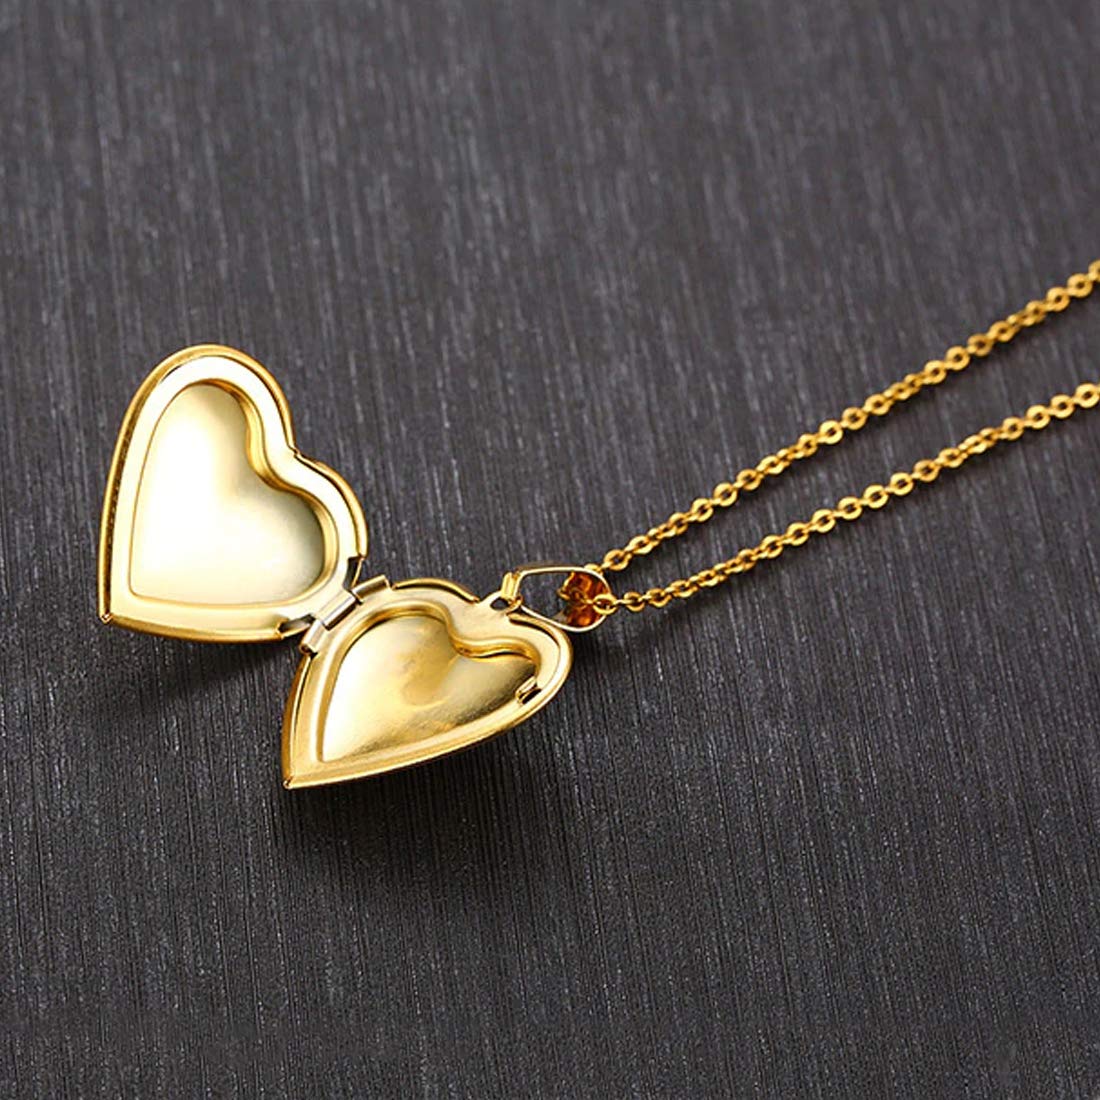 Yellow Chimes Pendant for Women Golden Openable Heart Photo Frame Locket Gift Jewelry Pendant Necklace for Men and Women.